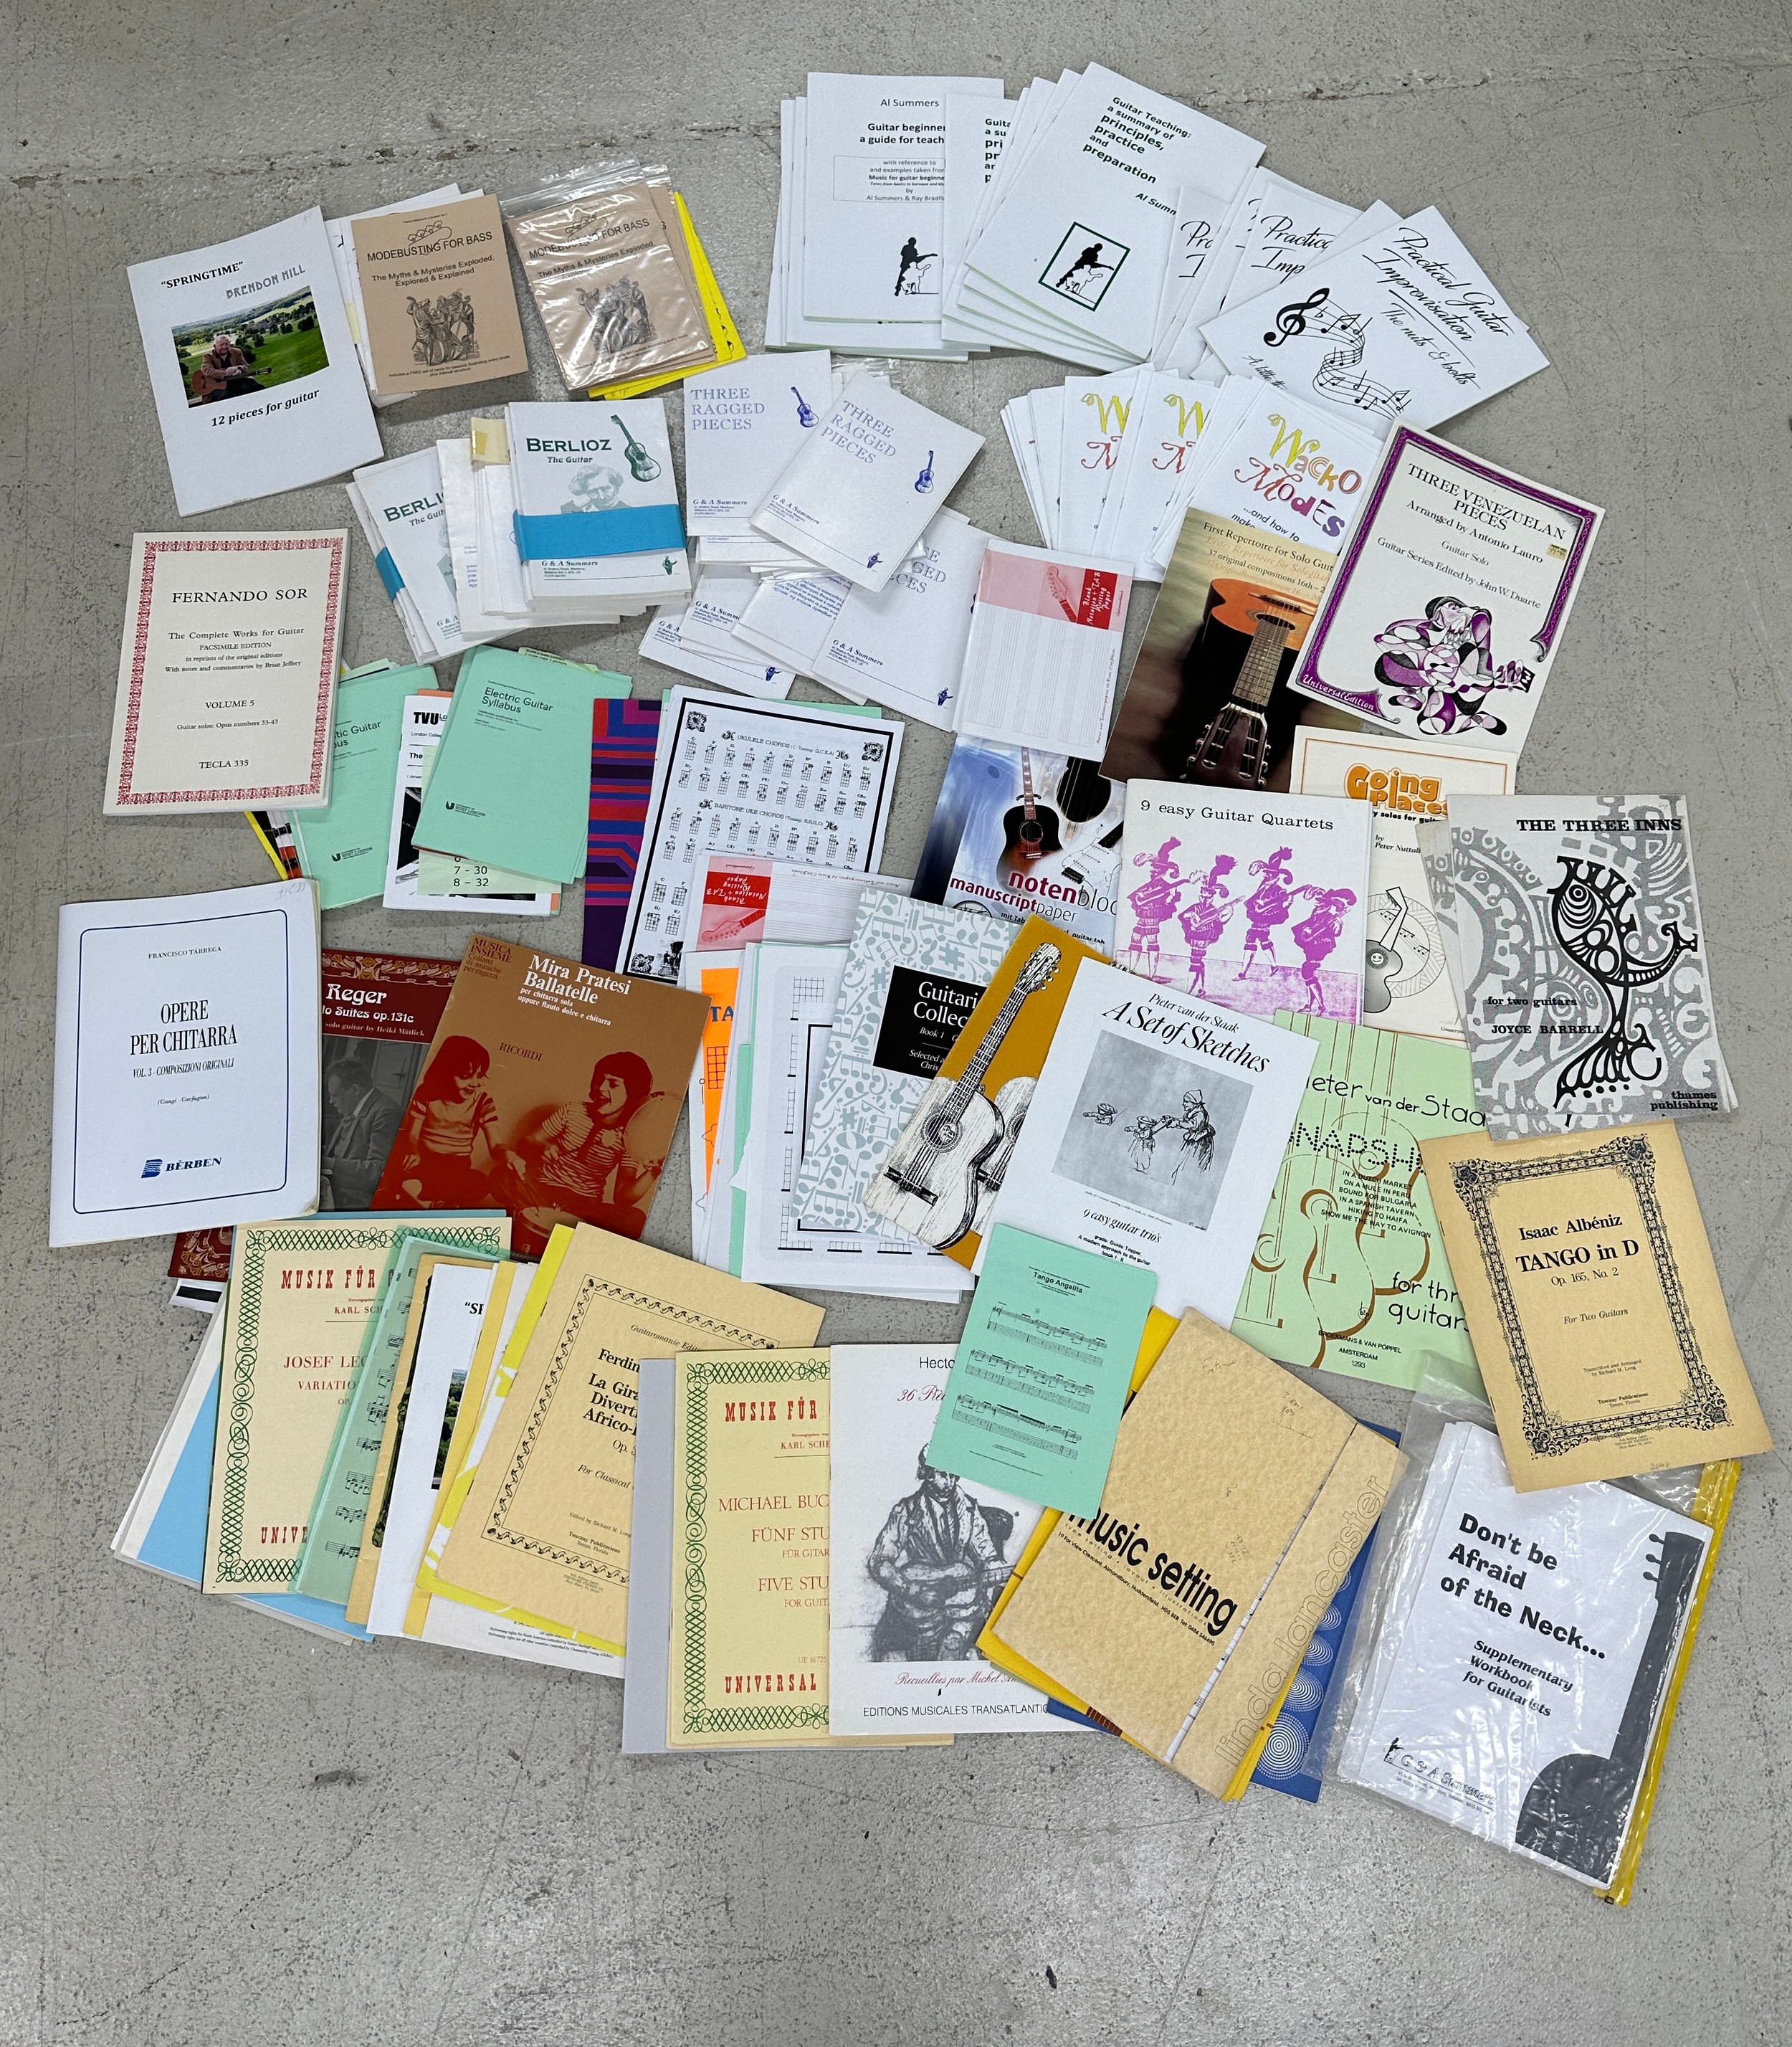 Large selection of guitar sheet music, scores and music books including classical and duets